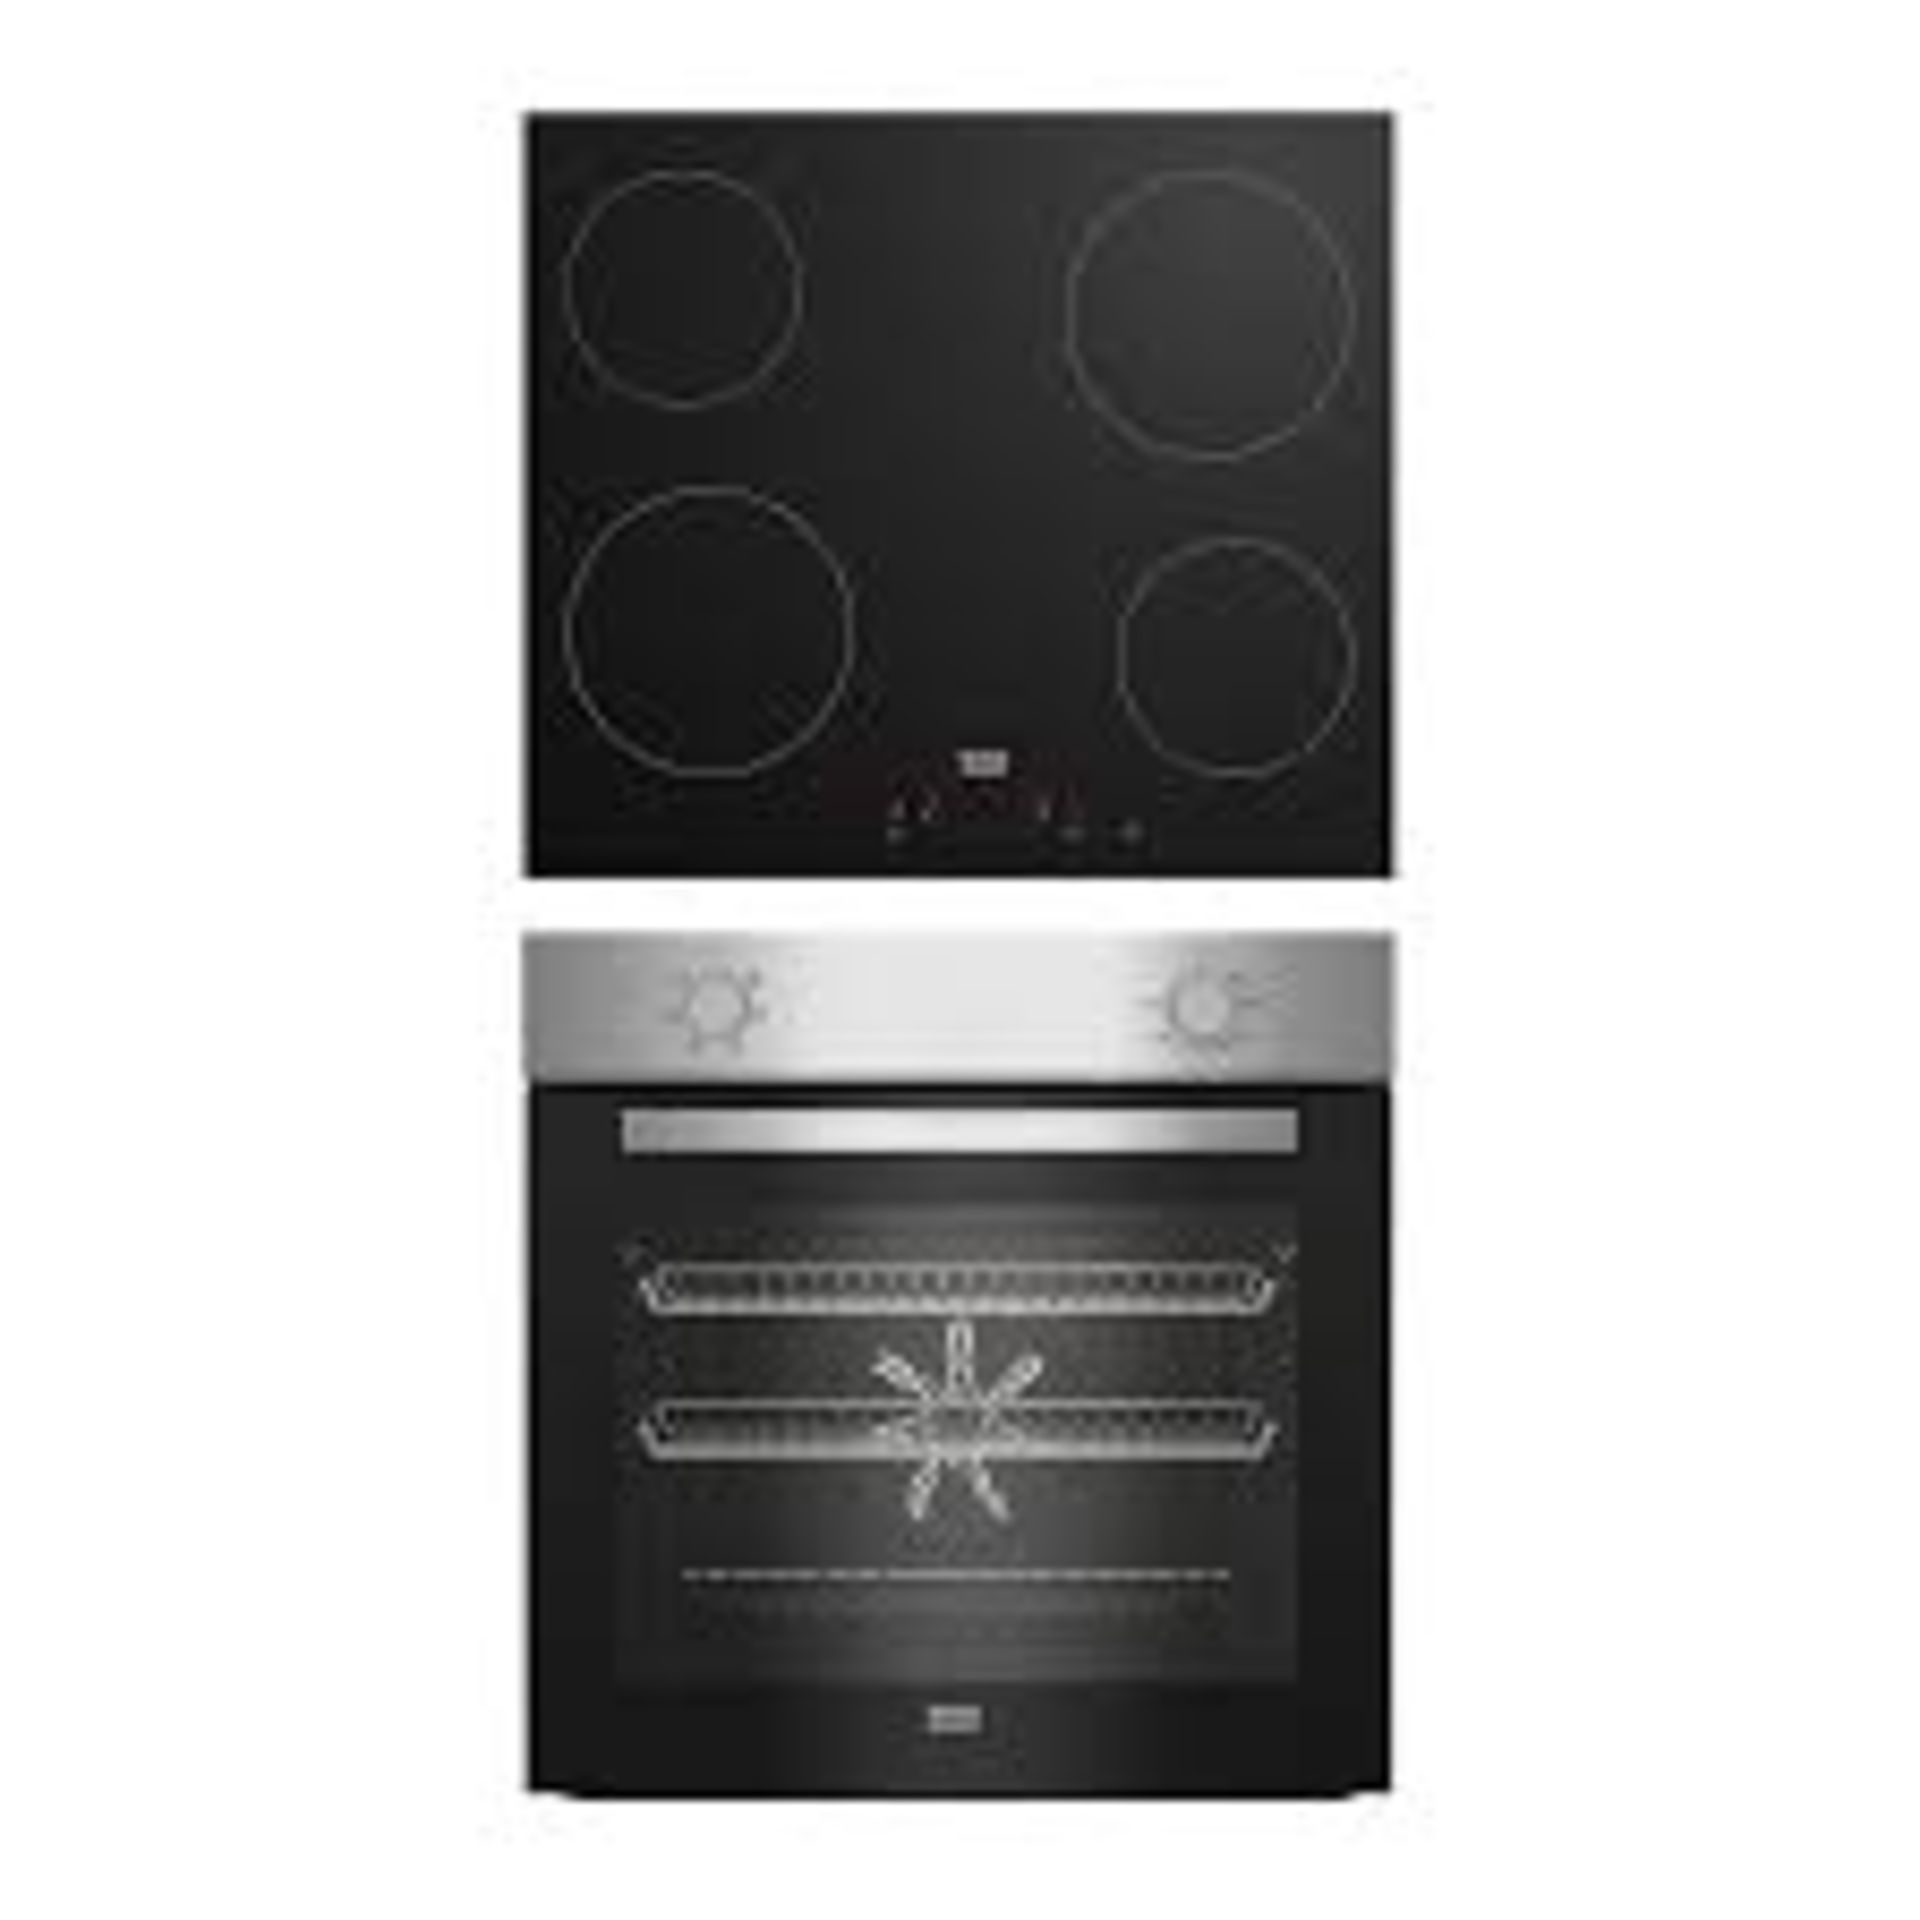 Beko QBSE222X Built-in Multifunction Oven & hob pack . - ER45. Bake perfect cupcakes, roast a